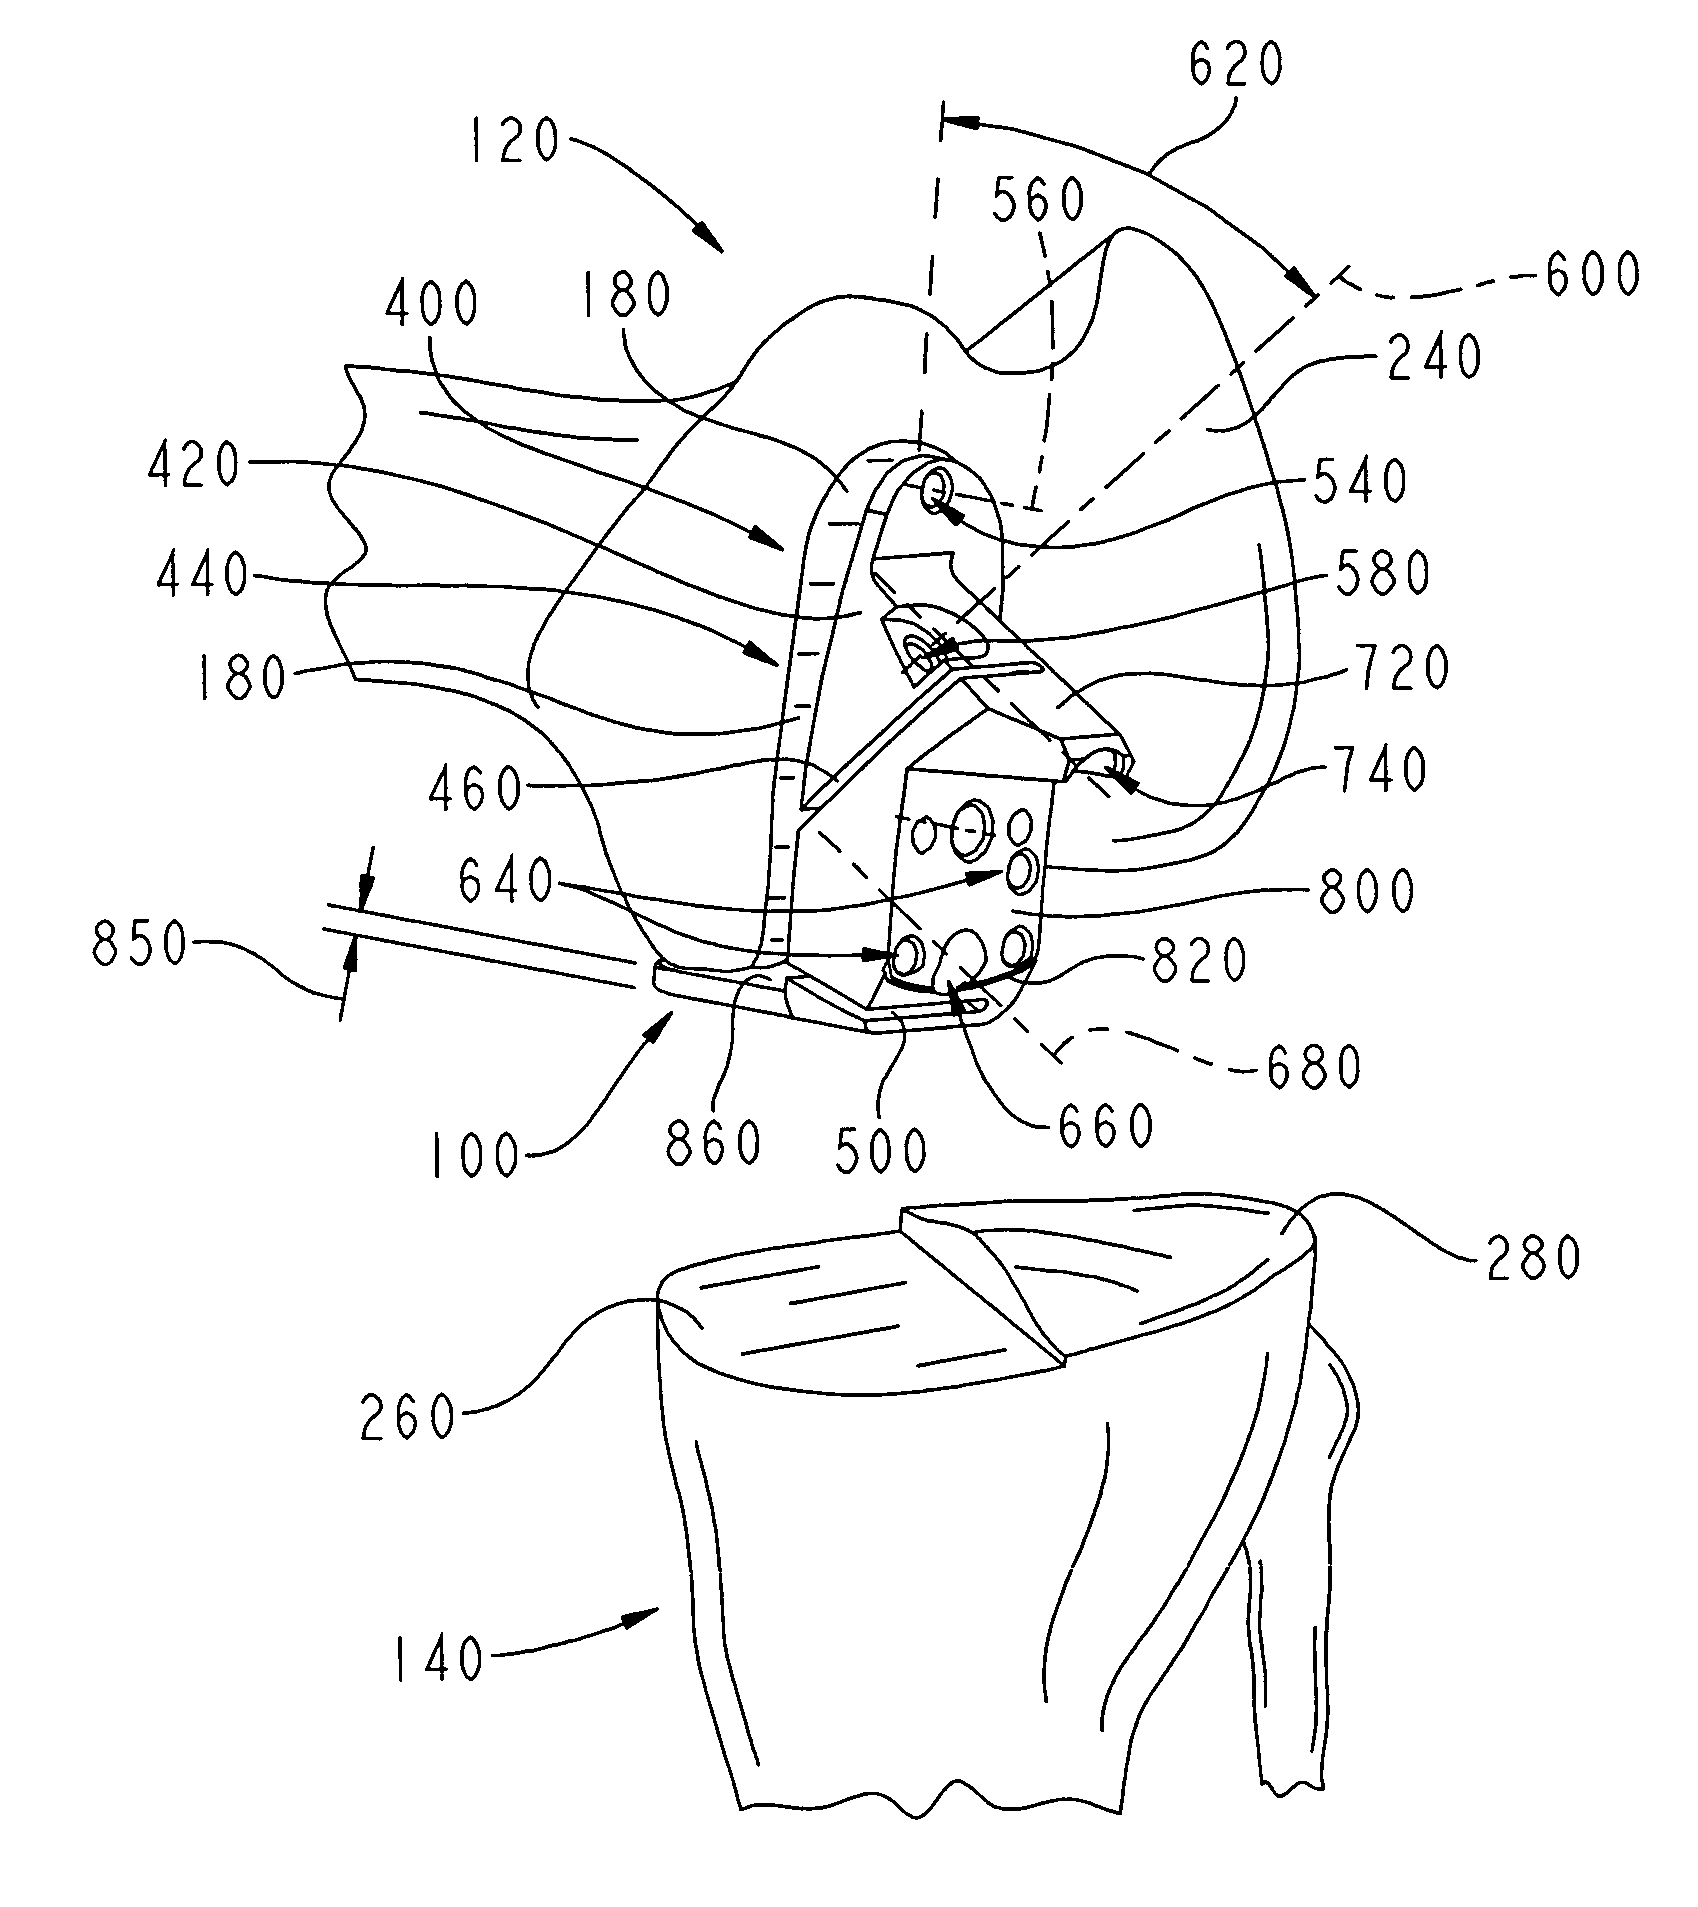 Femoral resection guide apparatus and method